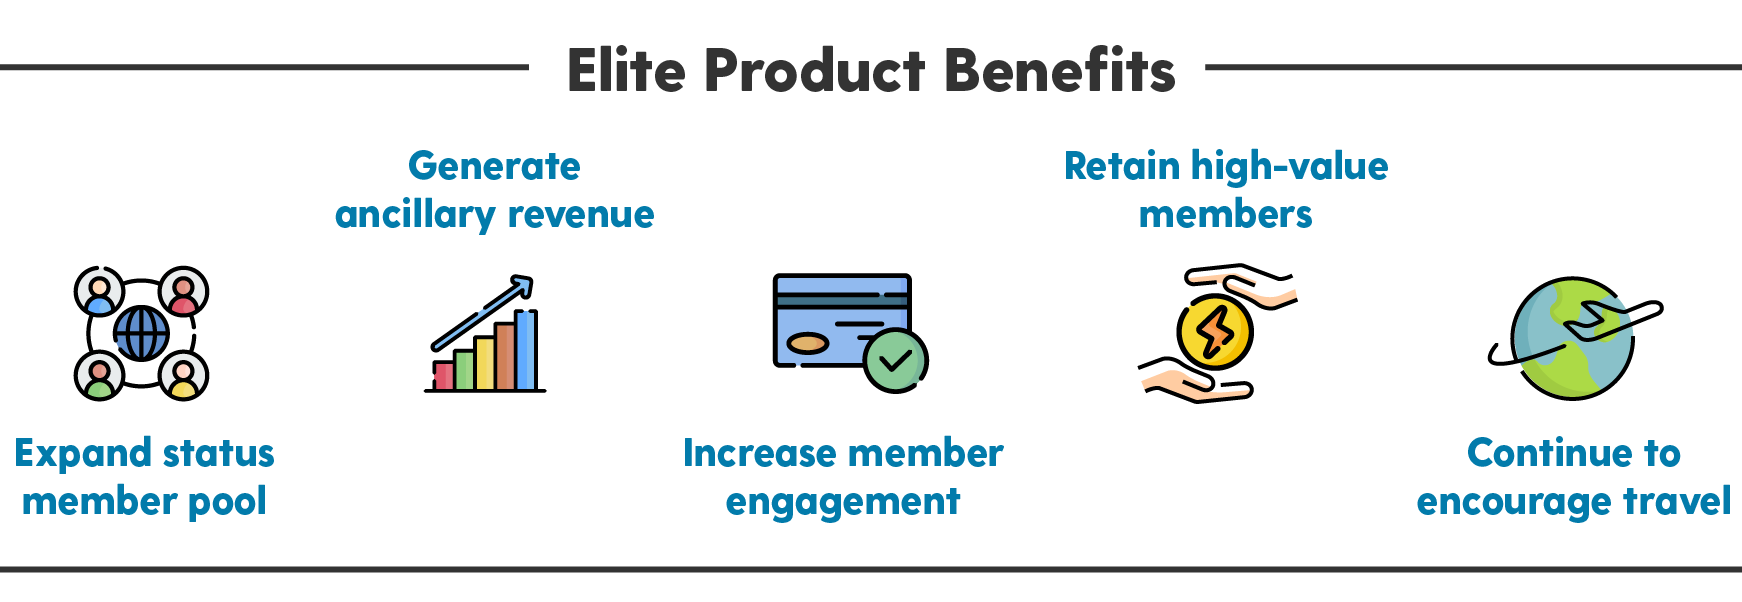 Elite product benefits. Expand status member pool, generate ancillary revenue, increase member engagement, retain high-value members, and continue to encourage travel. 